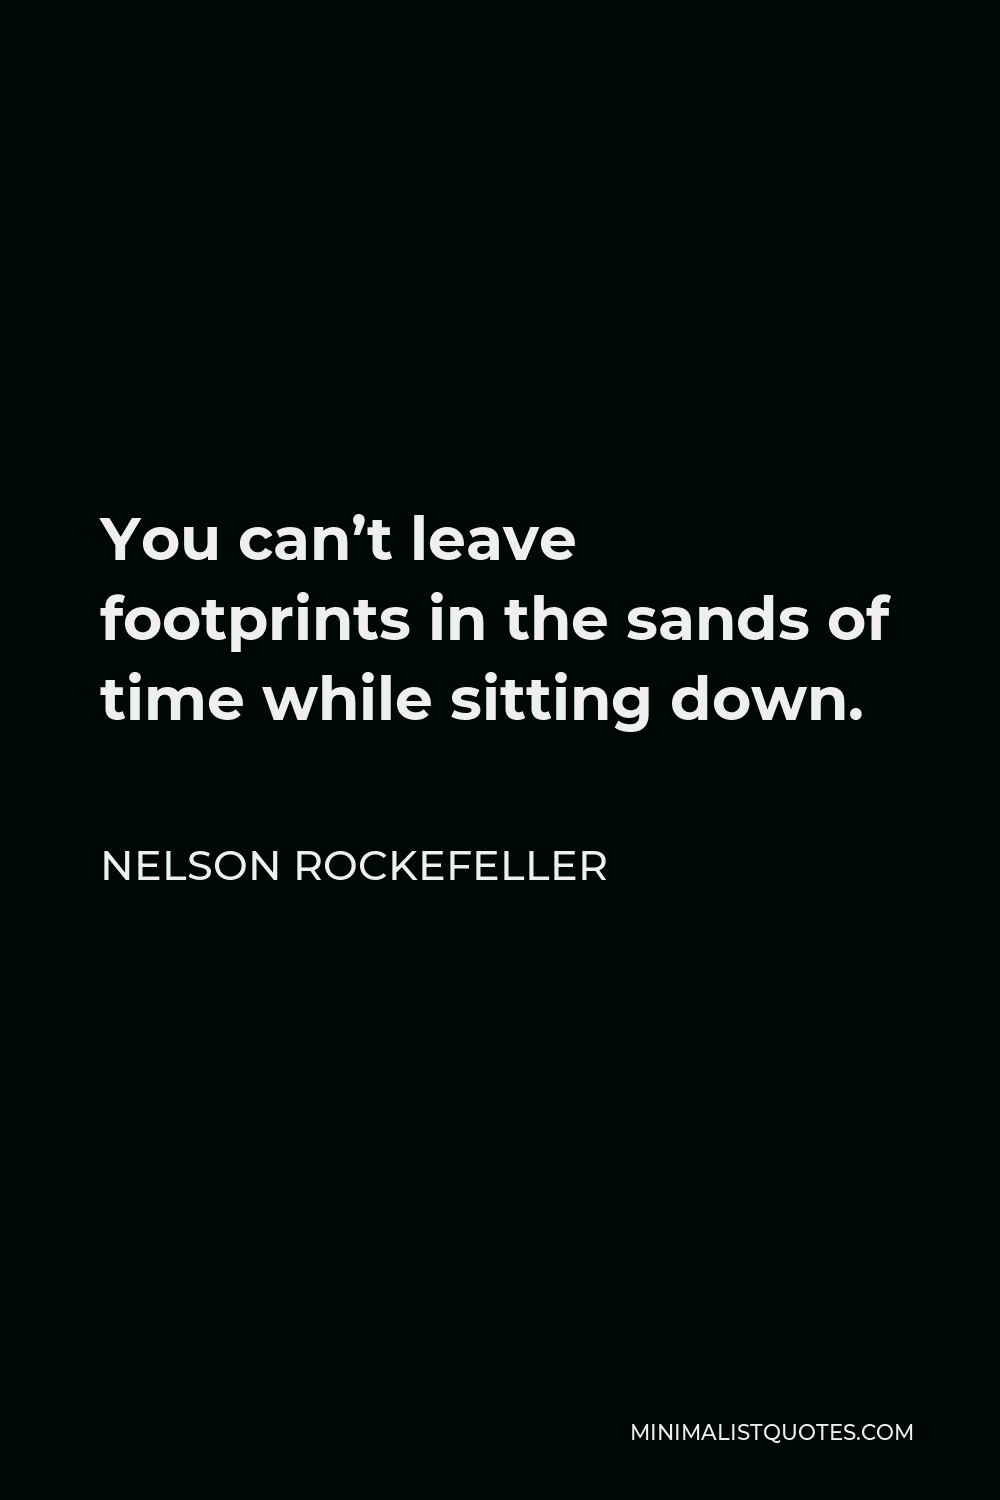 Nelson Rockefeller Quote - You can’t leave footprints in the sands of time while sitting down.